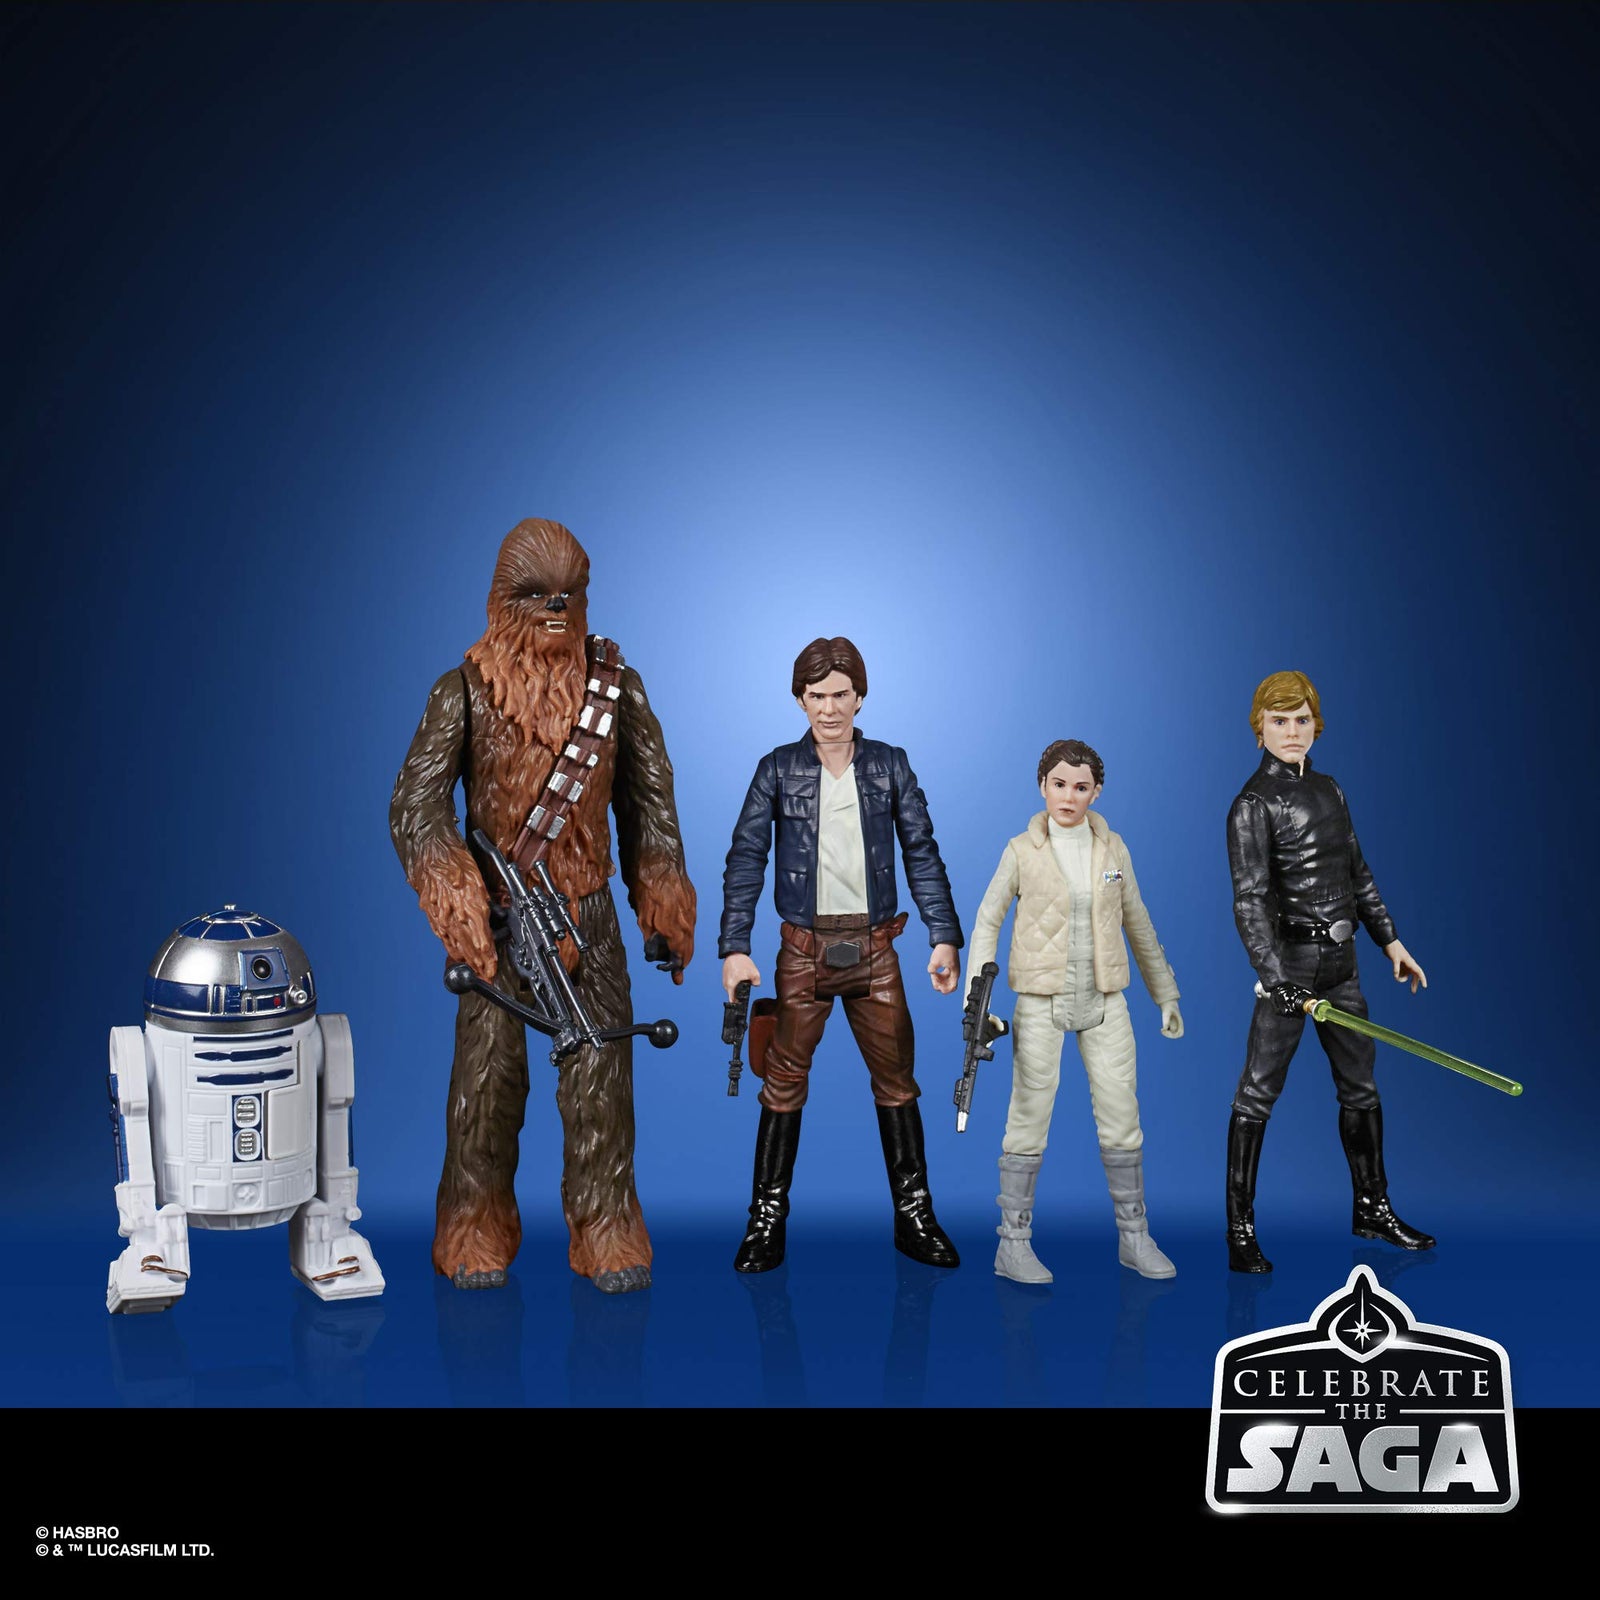 Star Wars Celebrate The Saga Toys Rebel Alliance Figure Set, 3.75-Inch-Scale Collectible Action Figure 5-Pack (Amazon Exclusive)